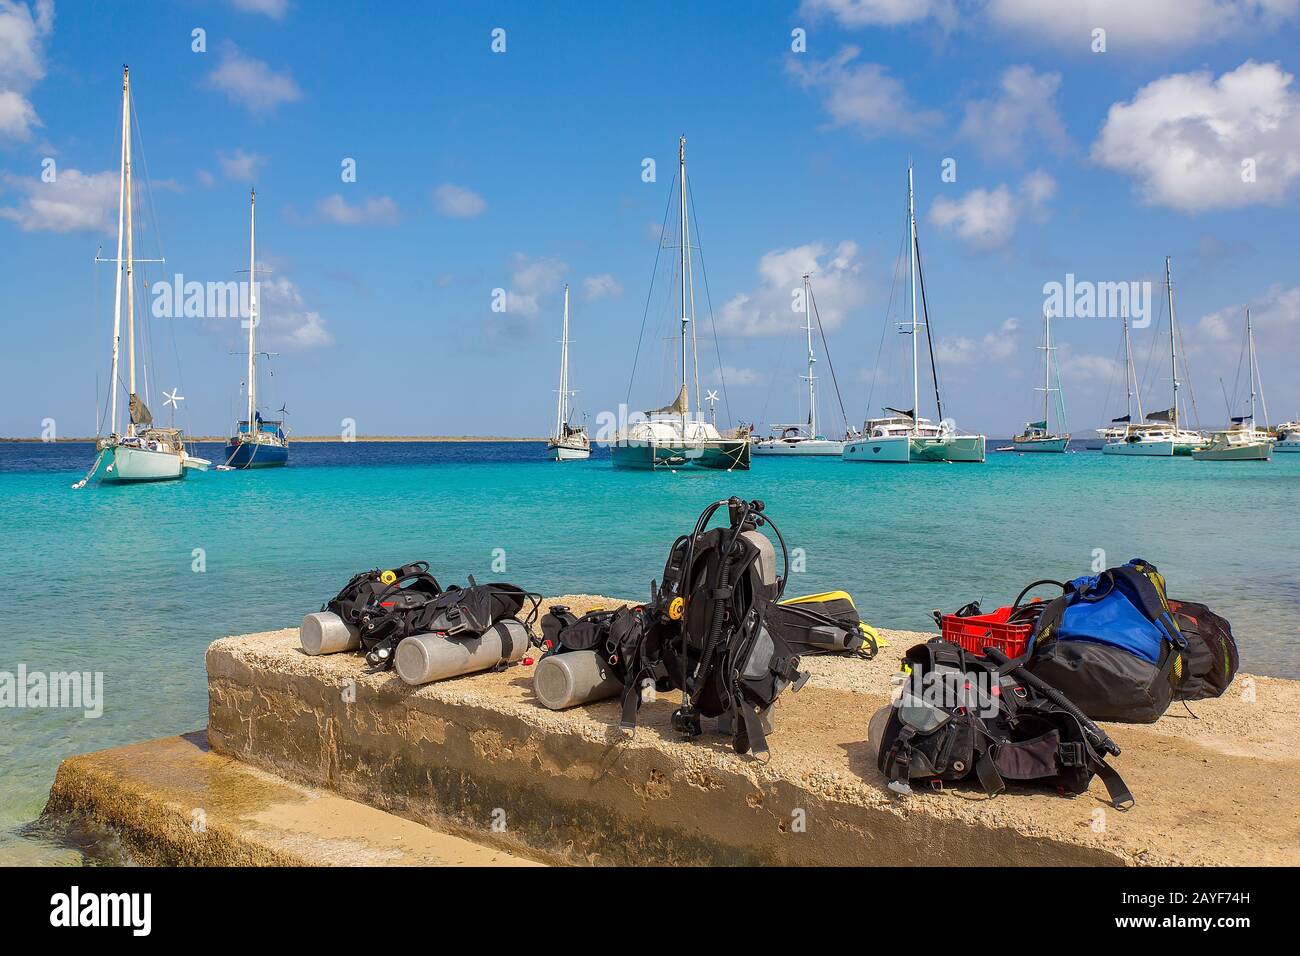 Diving equipment on coast with boats on sea Stock Photo